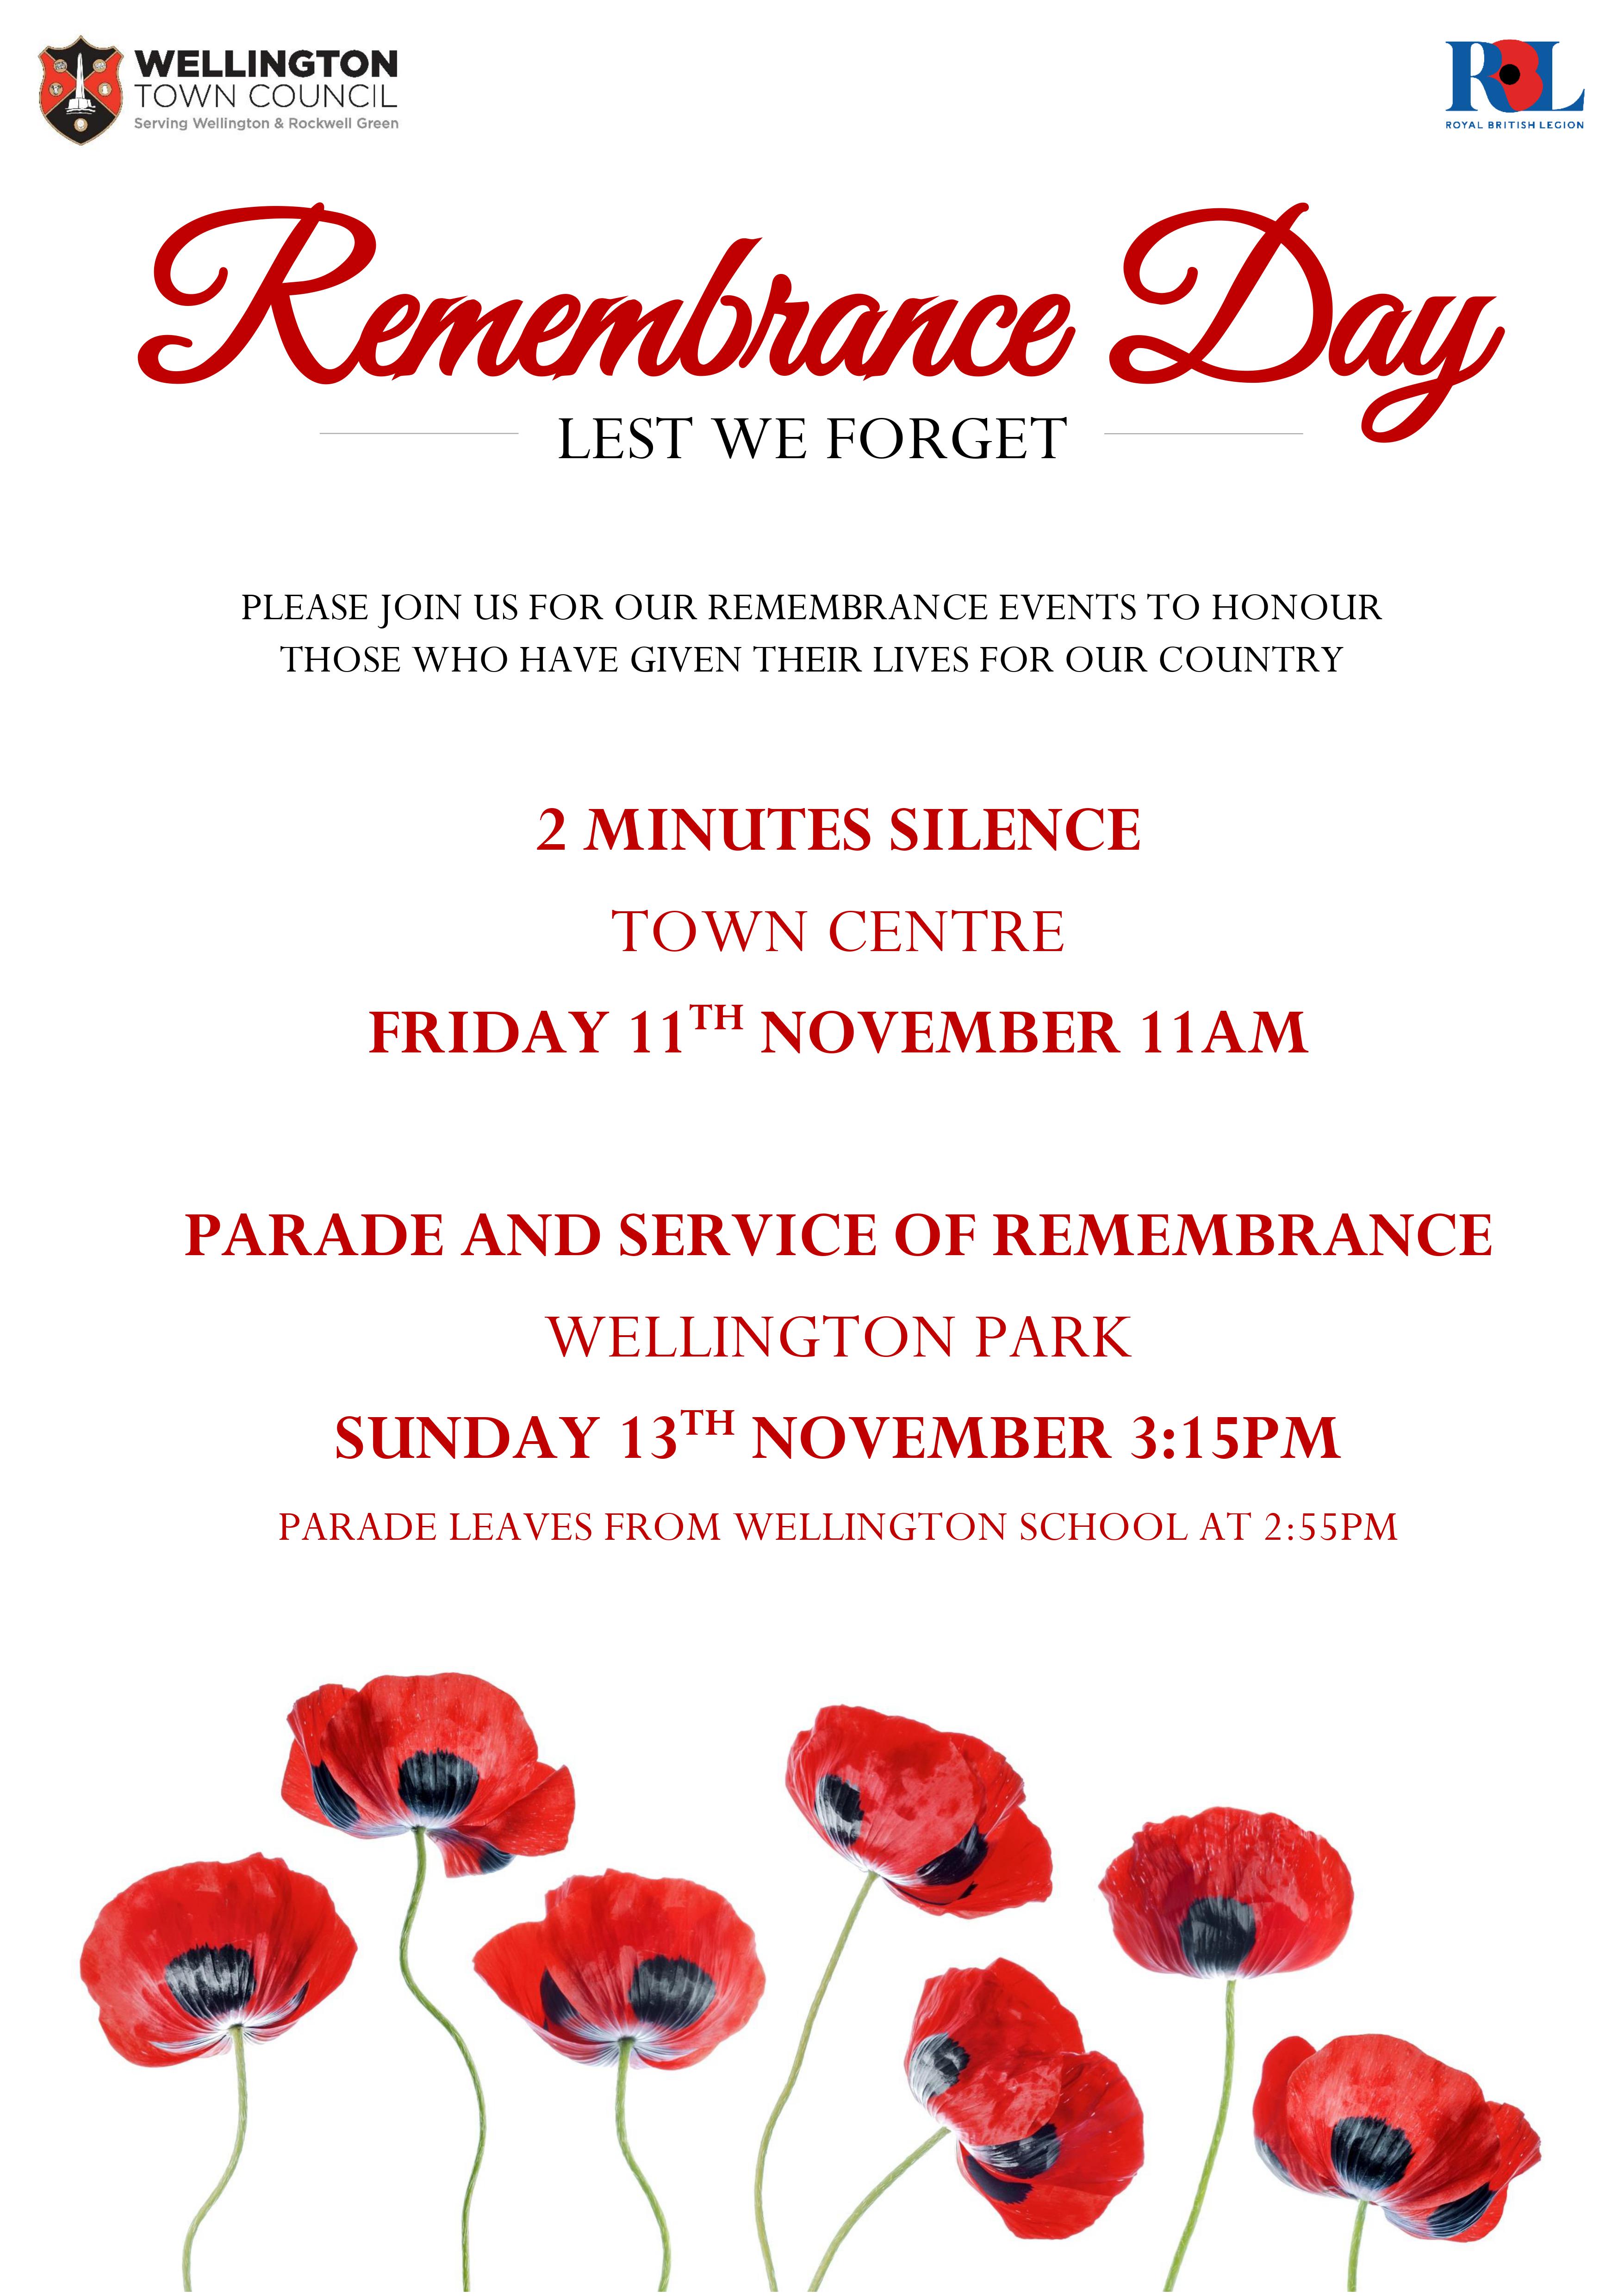 2 minutes silence, town centre, Friday 11th November, 11am. Parade and service of remembrance, wellington park, Sunday 13th November, 3:15pm